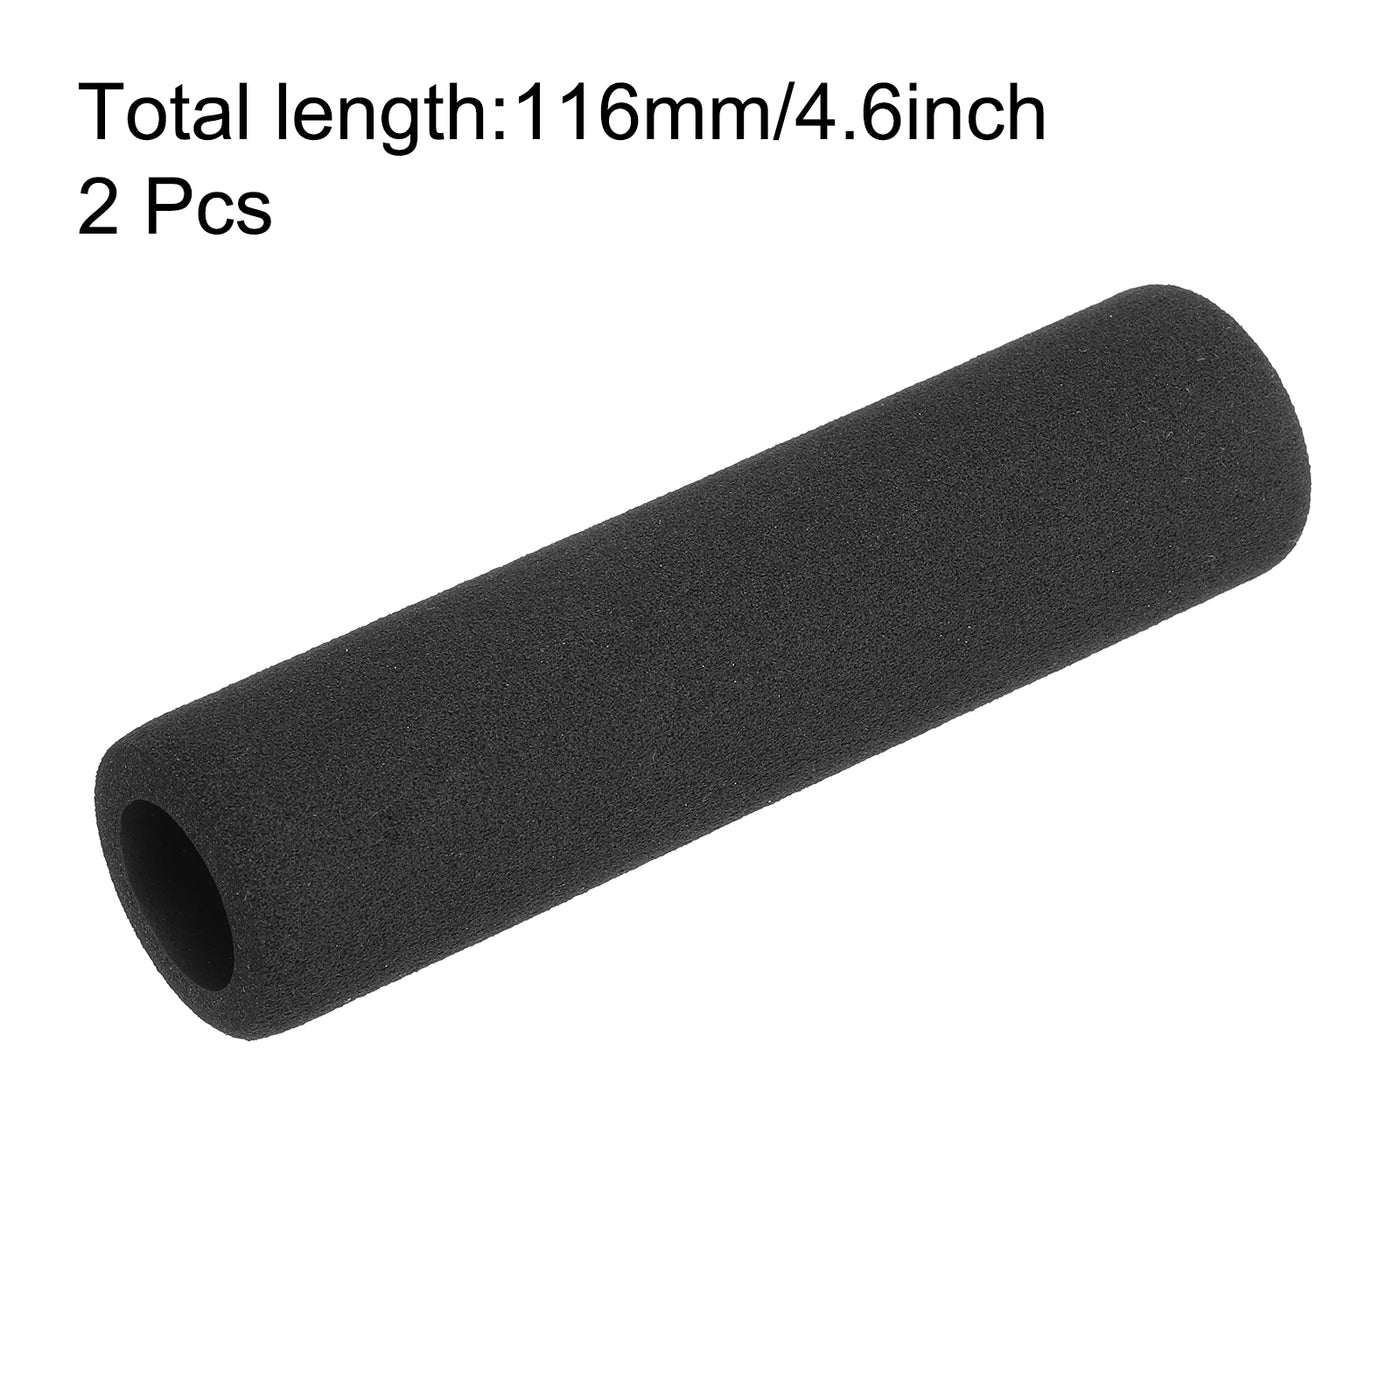 uxcell Uxcell Pipe Insulation Tube Foam Tubing for Handle Grip Support 17mm ID 27mm OD 196mm Heat Preservation Black 2pcs